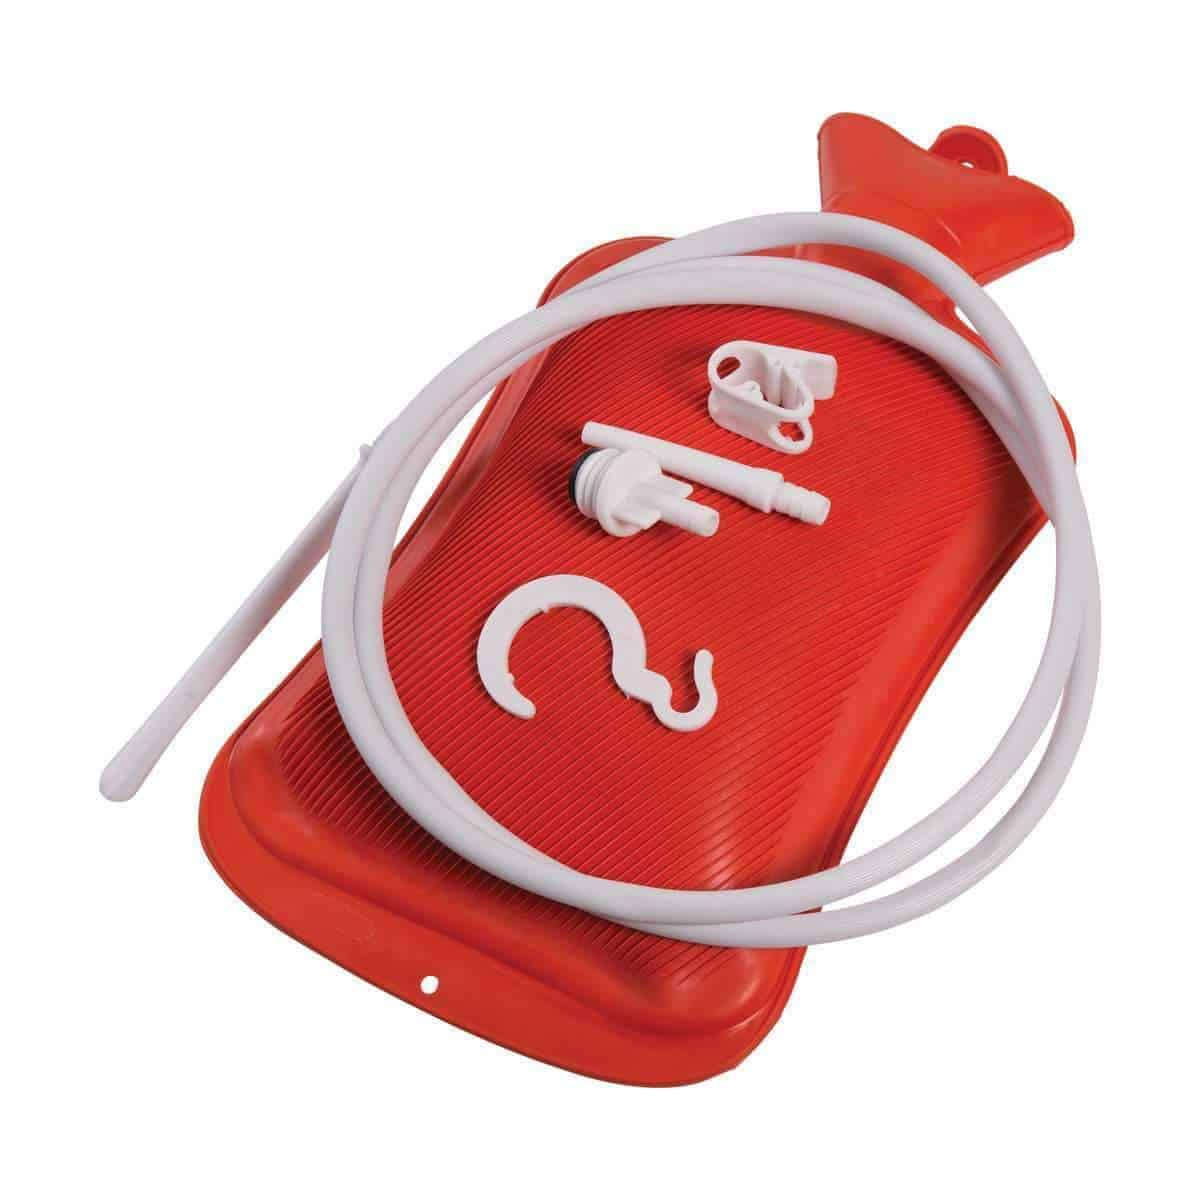 MABIS Medical Enema & Douche with Hot Water Bottle - Reusable and Easy to Clean - Senior.com Enema Kits